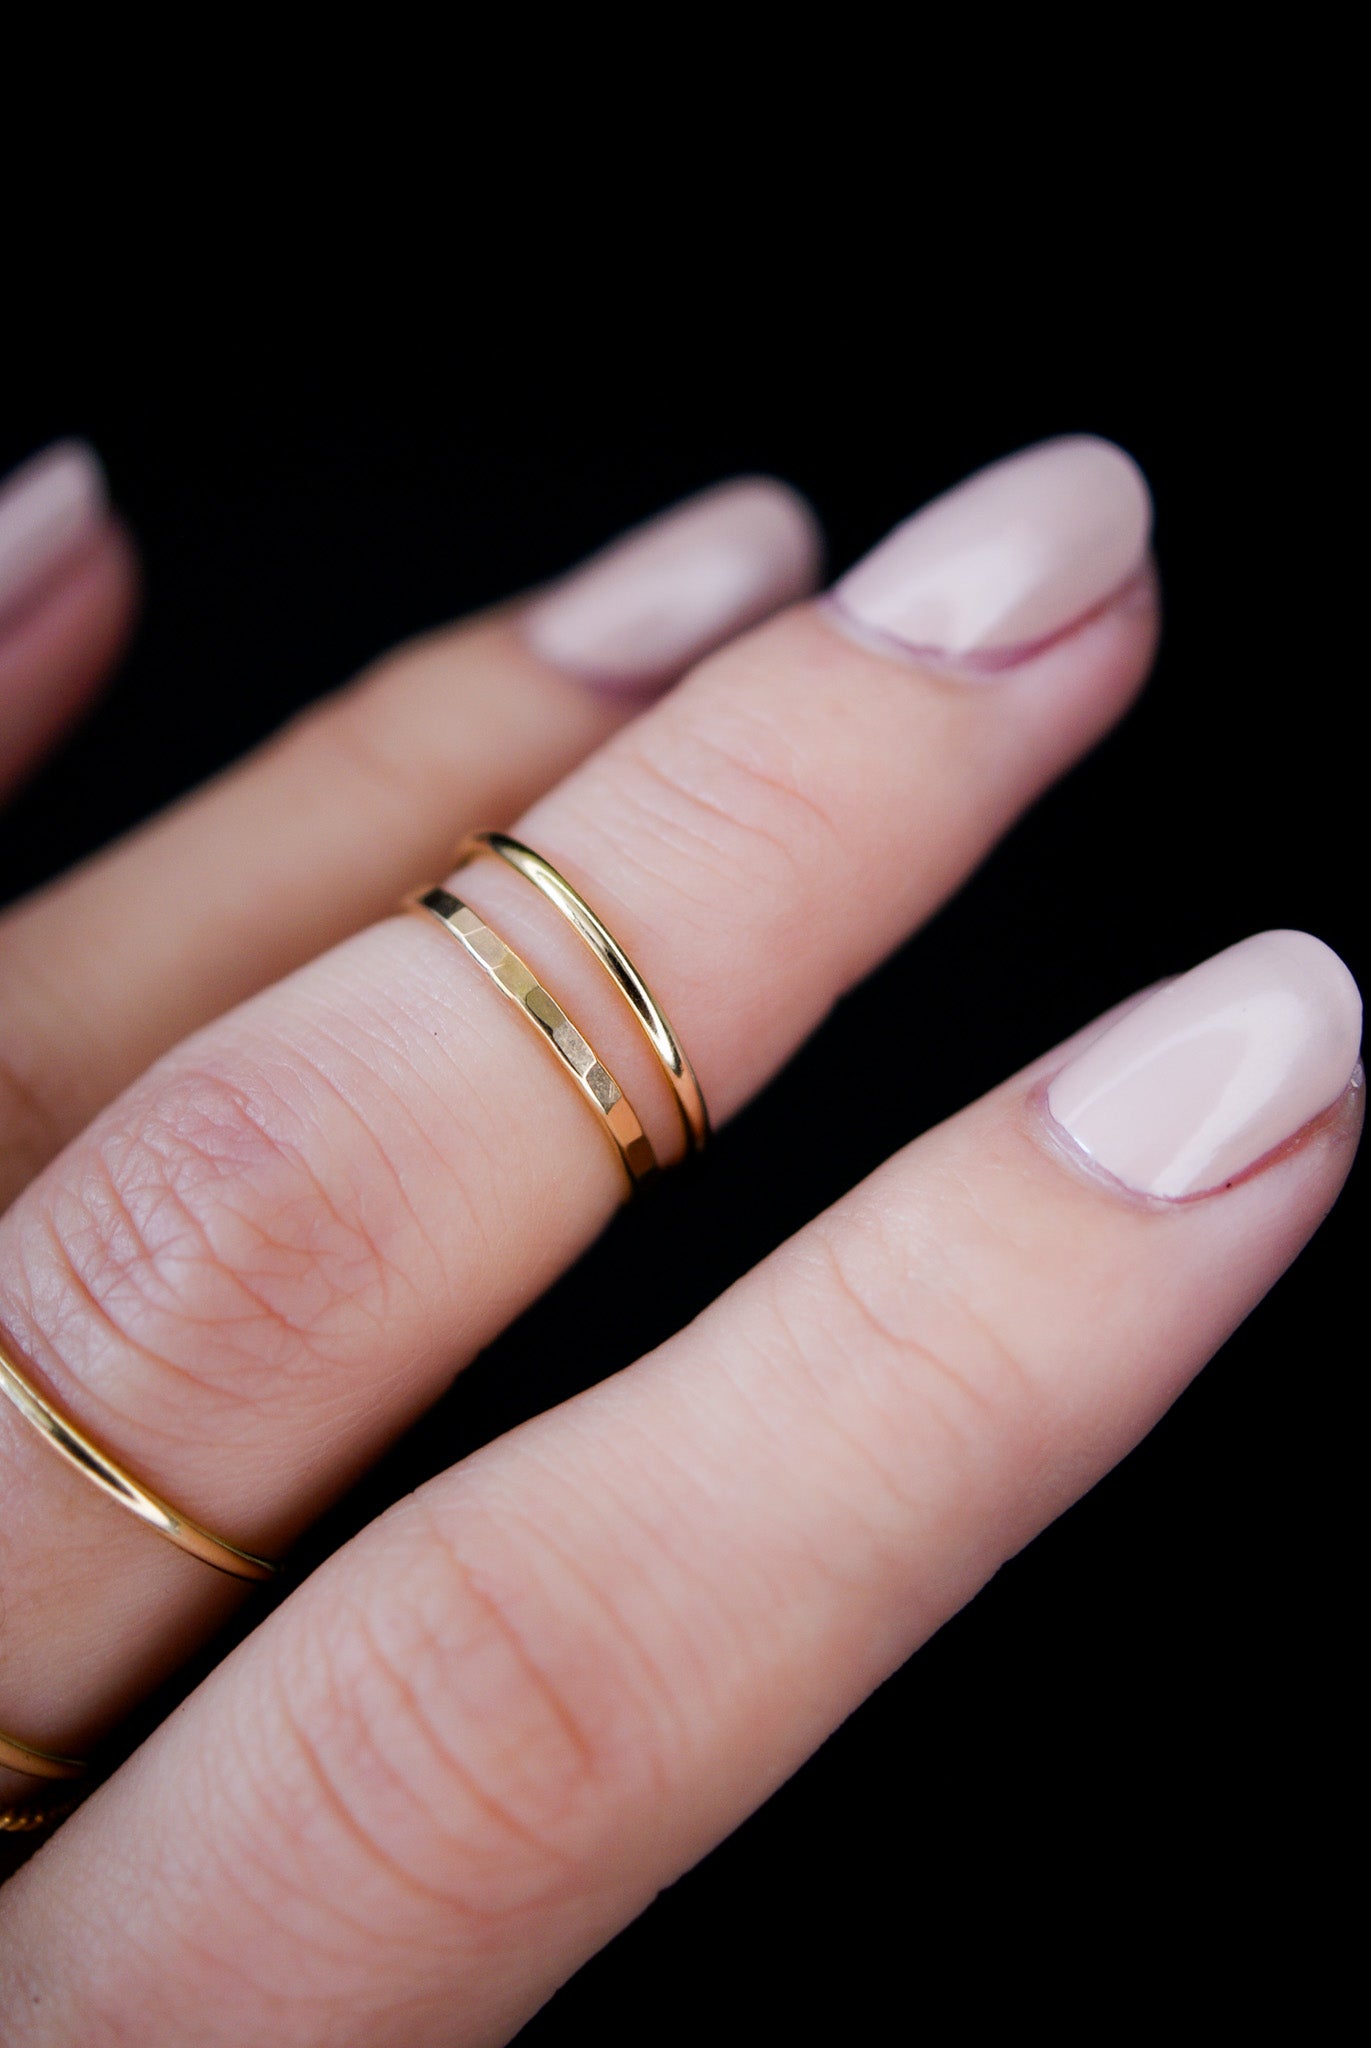 Gold Toe Ring|women's Geometric Hollow Gold-color Ring Set - Fashion  Jewelry For Parties